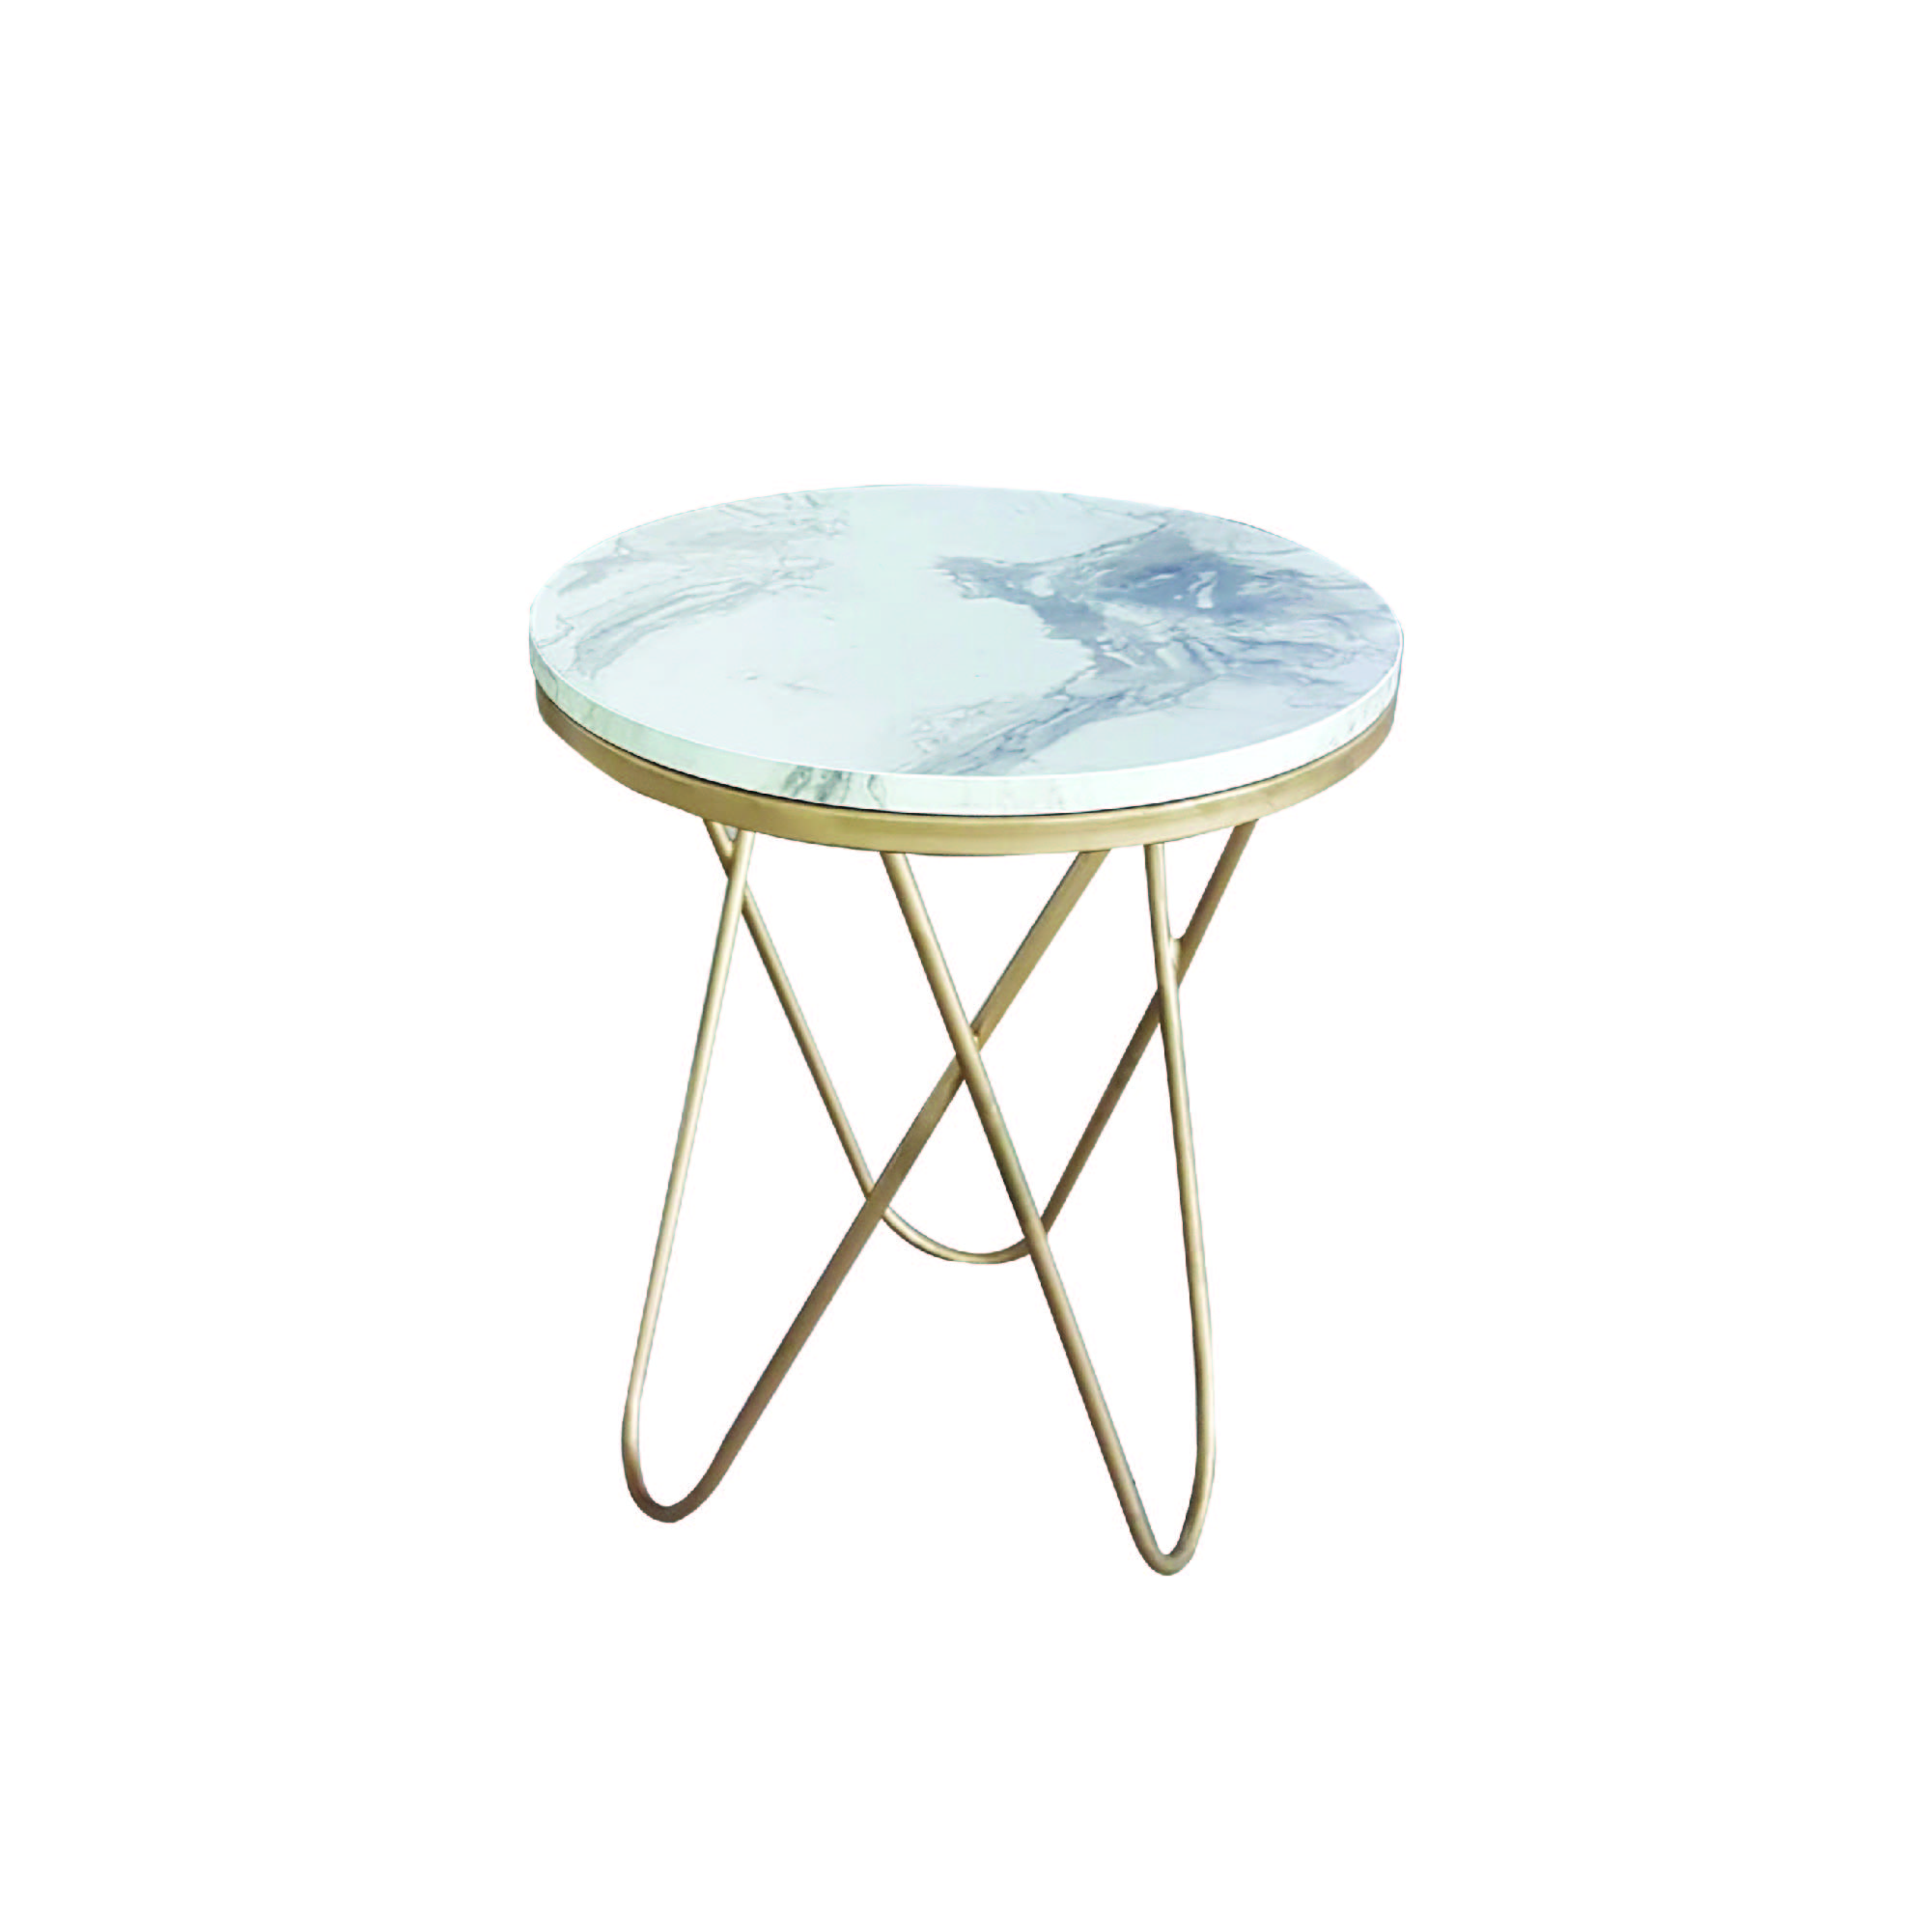 Mobili Casa, Round Table With Round Bar Gold Base With Lamaica Top Wood 46cm, RD46WGG